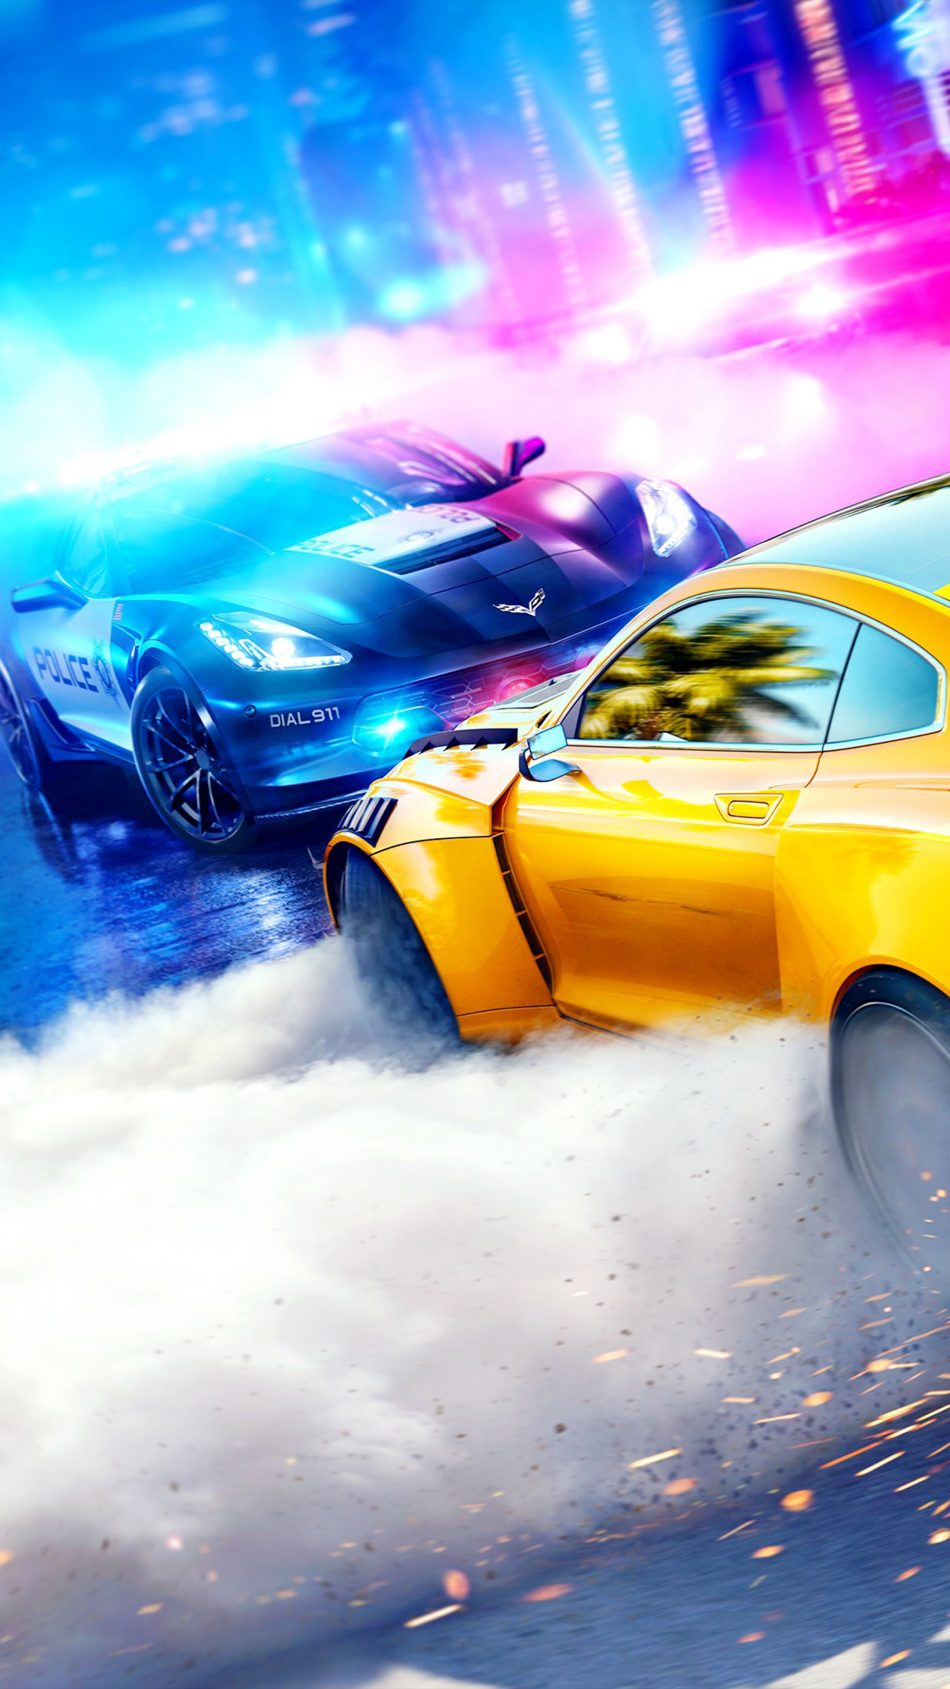 need for speed wallpaper hd,vehicle,car,automotive design,yellow,sports car